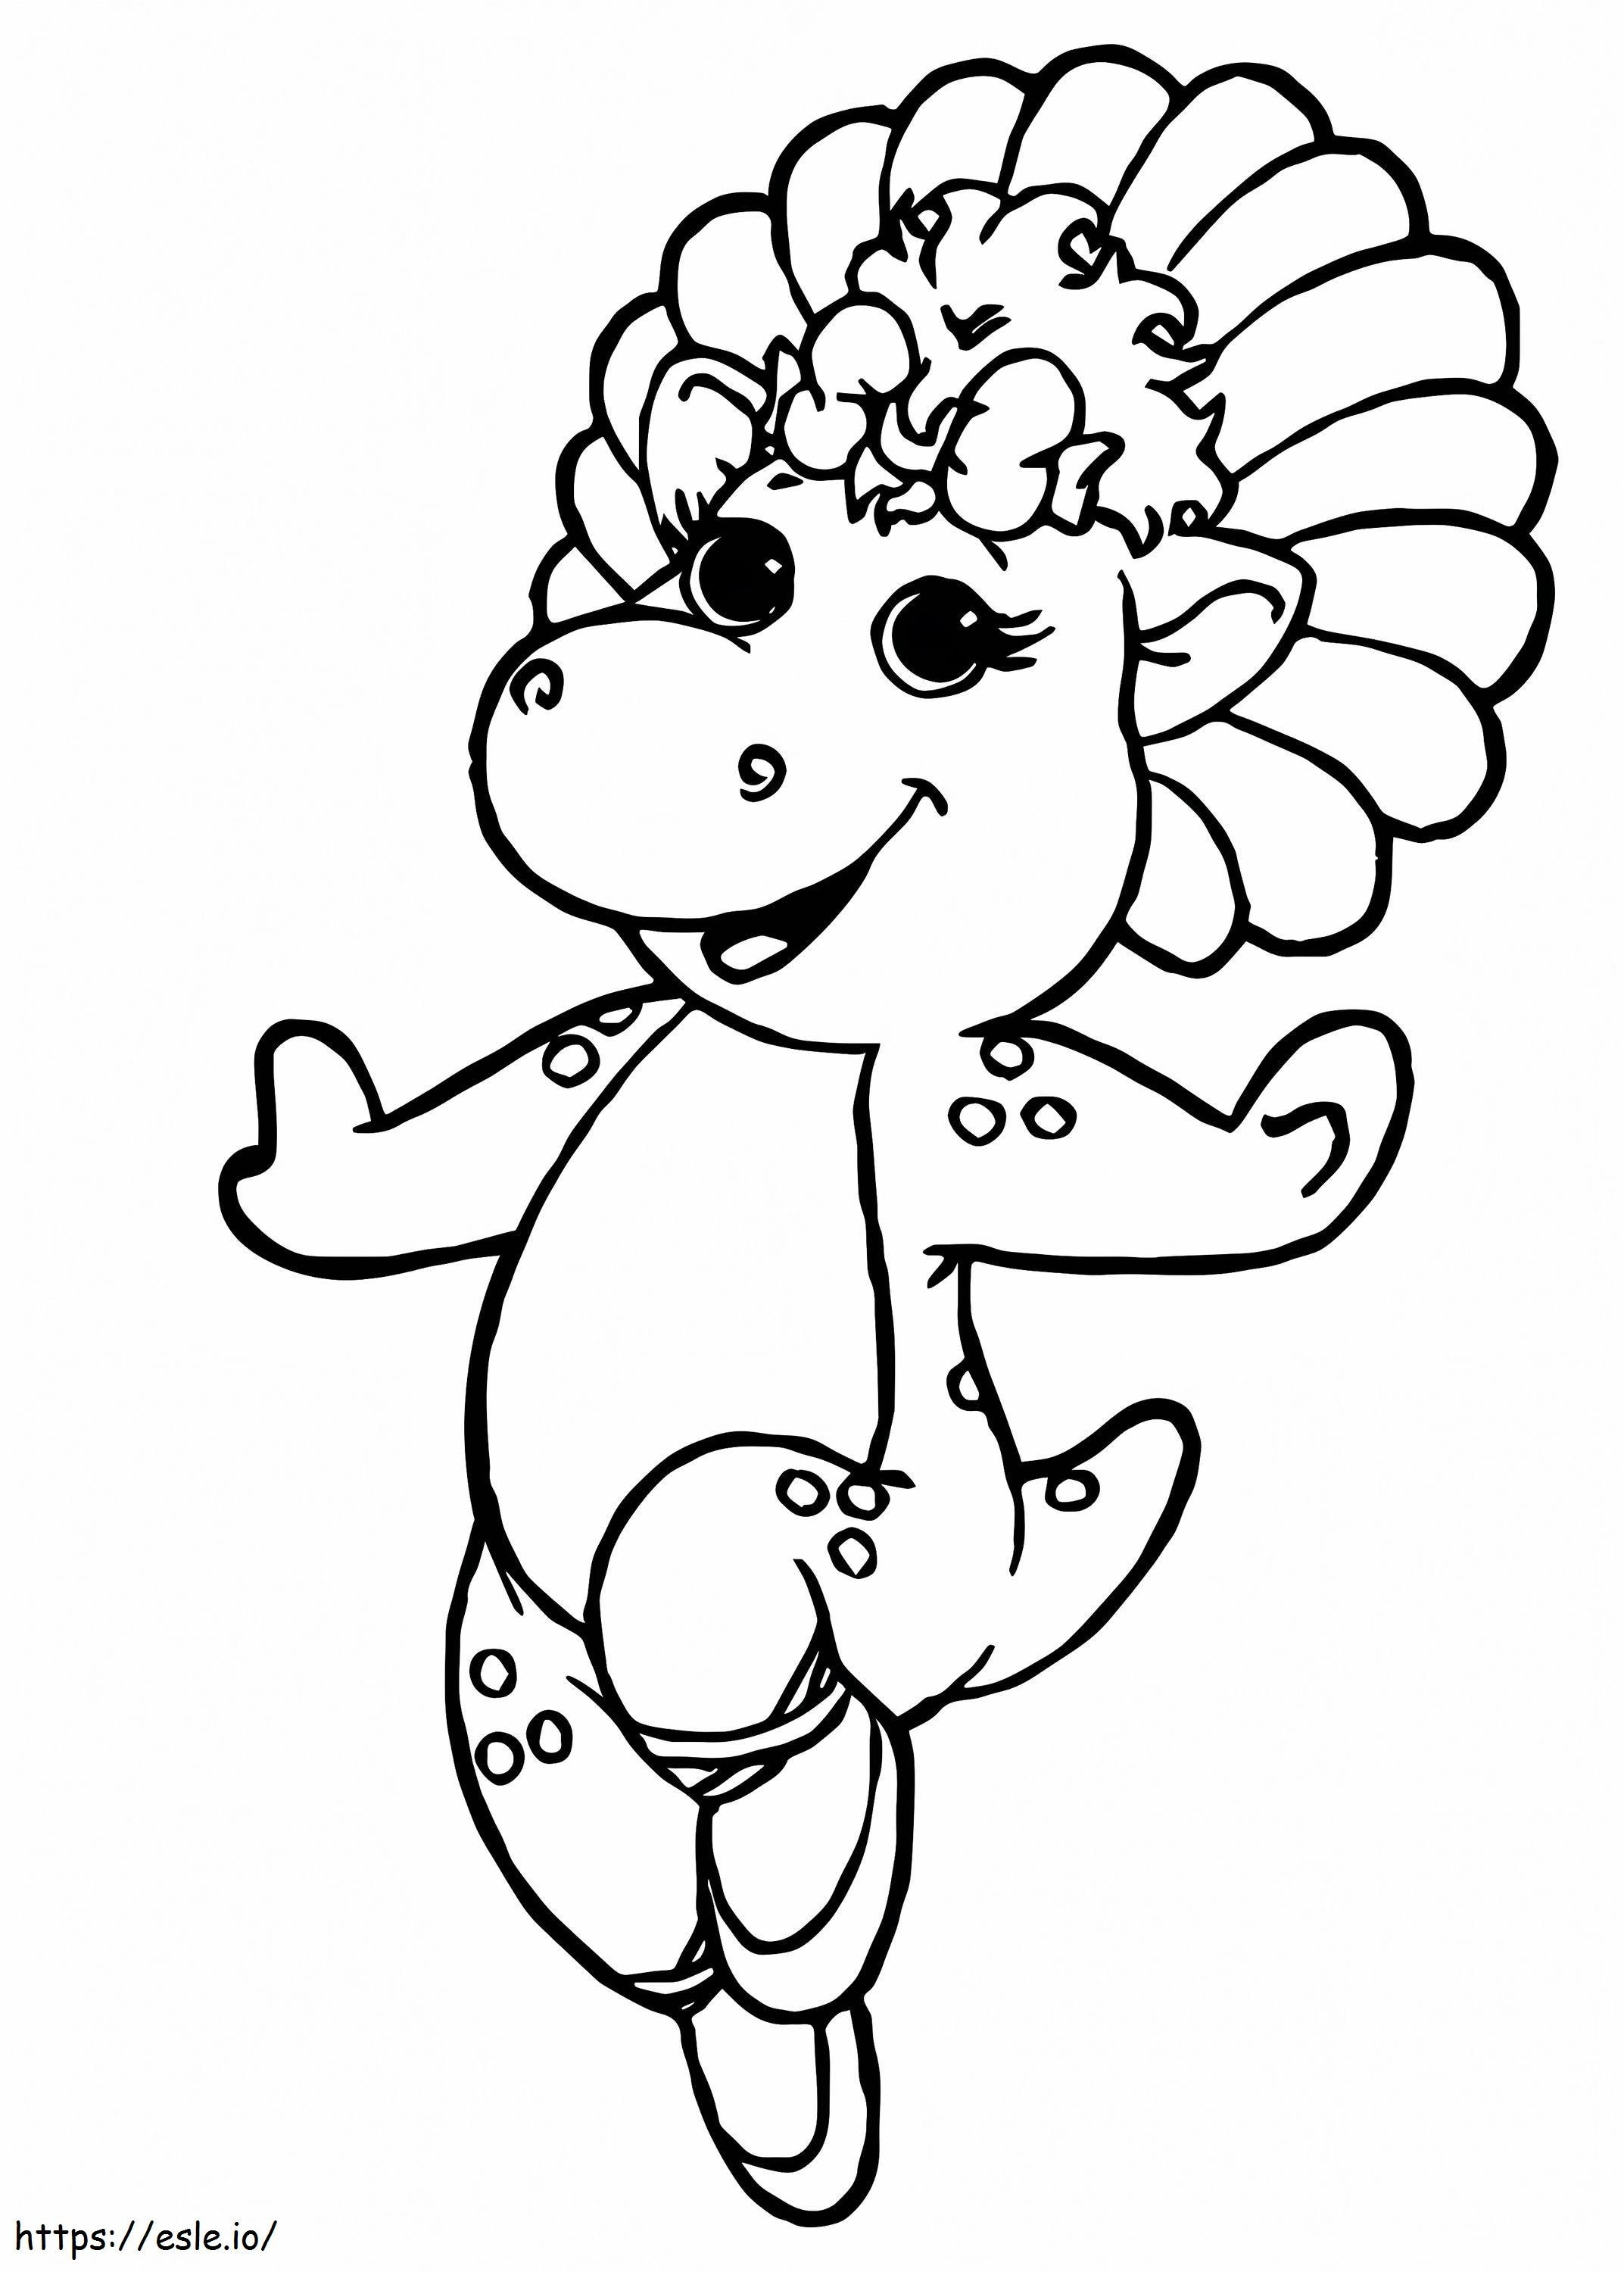 1581129848 Barney Coloring Sheets Printable Champprint Cos Fantastic Free Scaled 1 coloring page